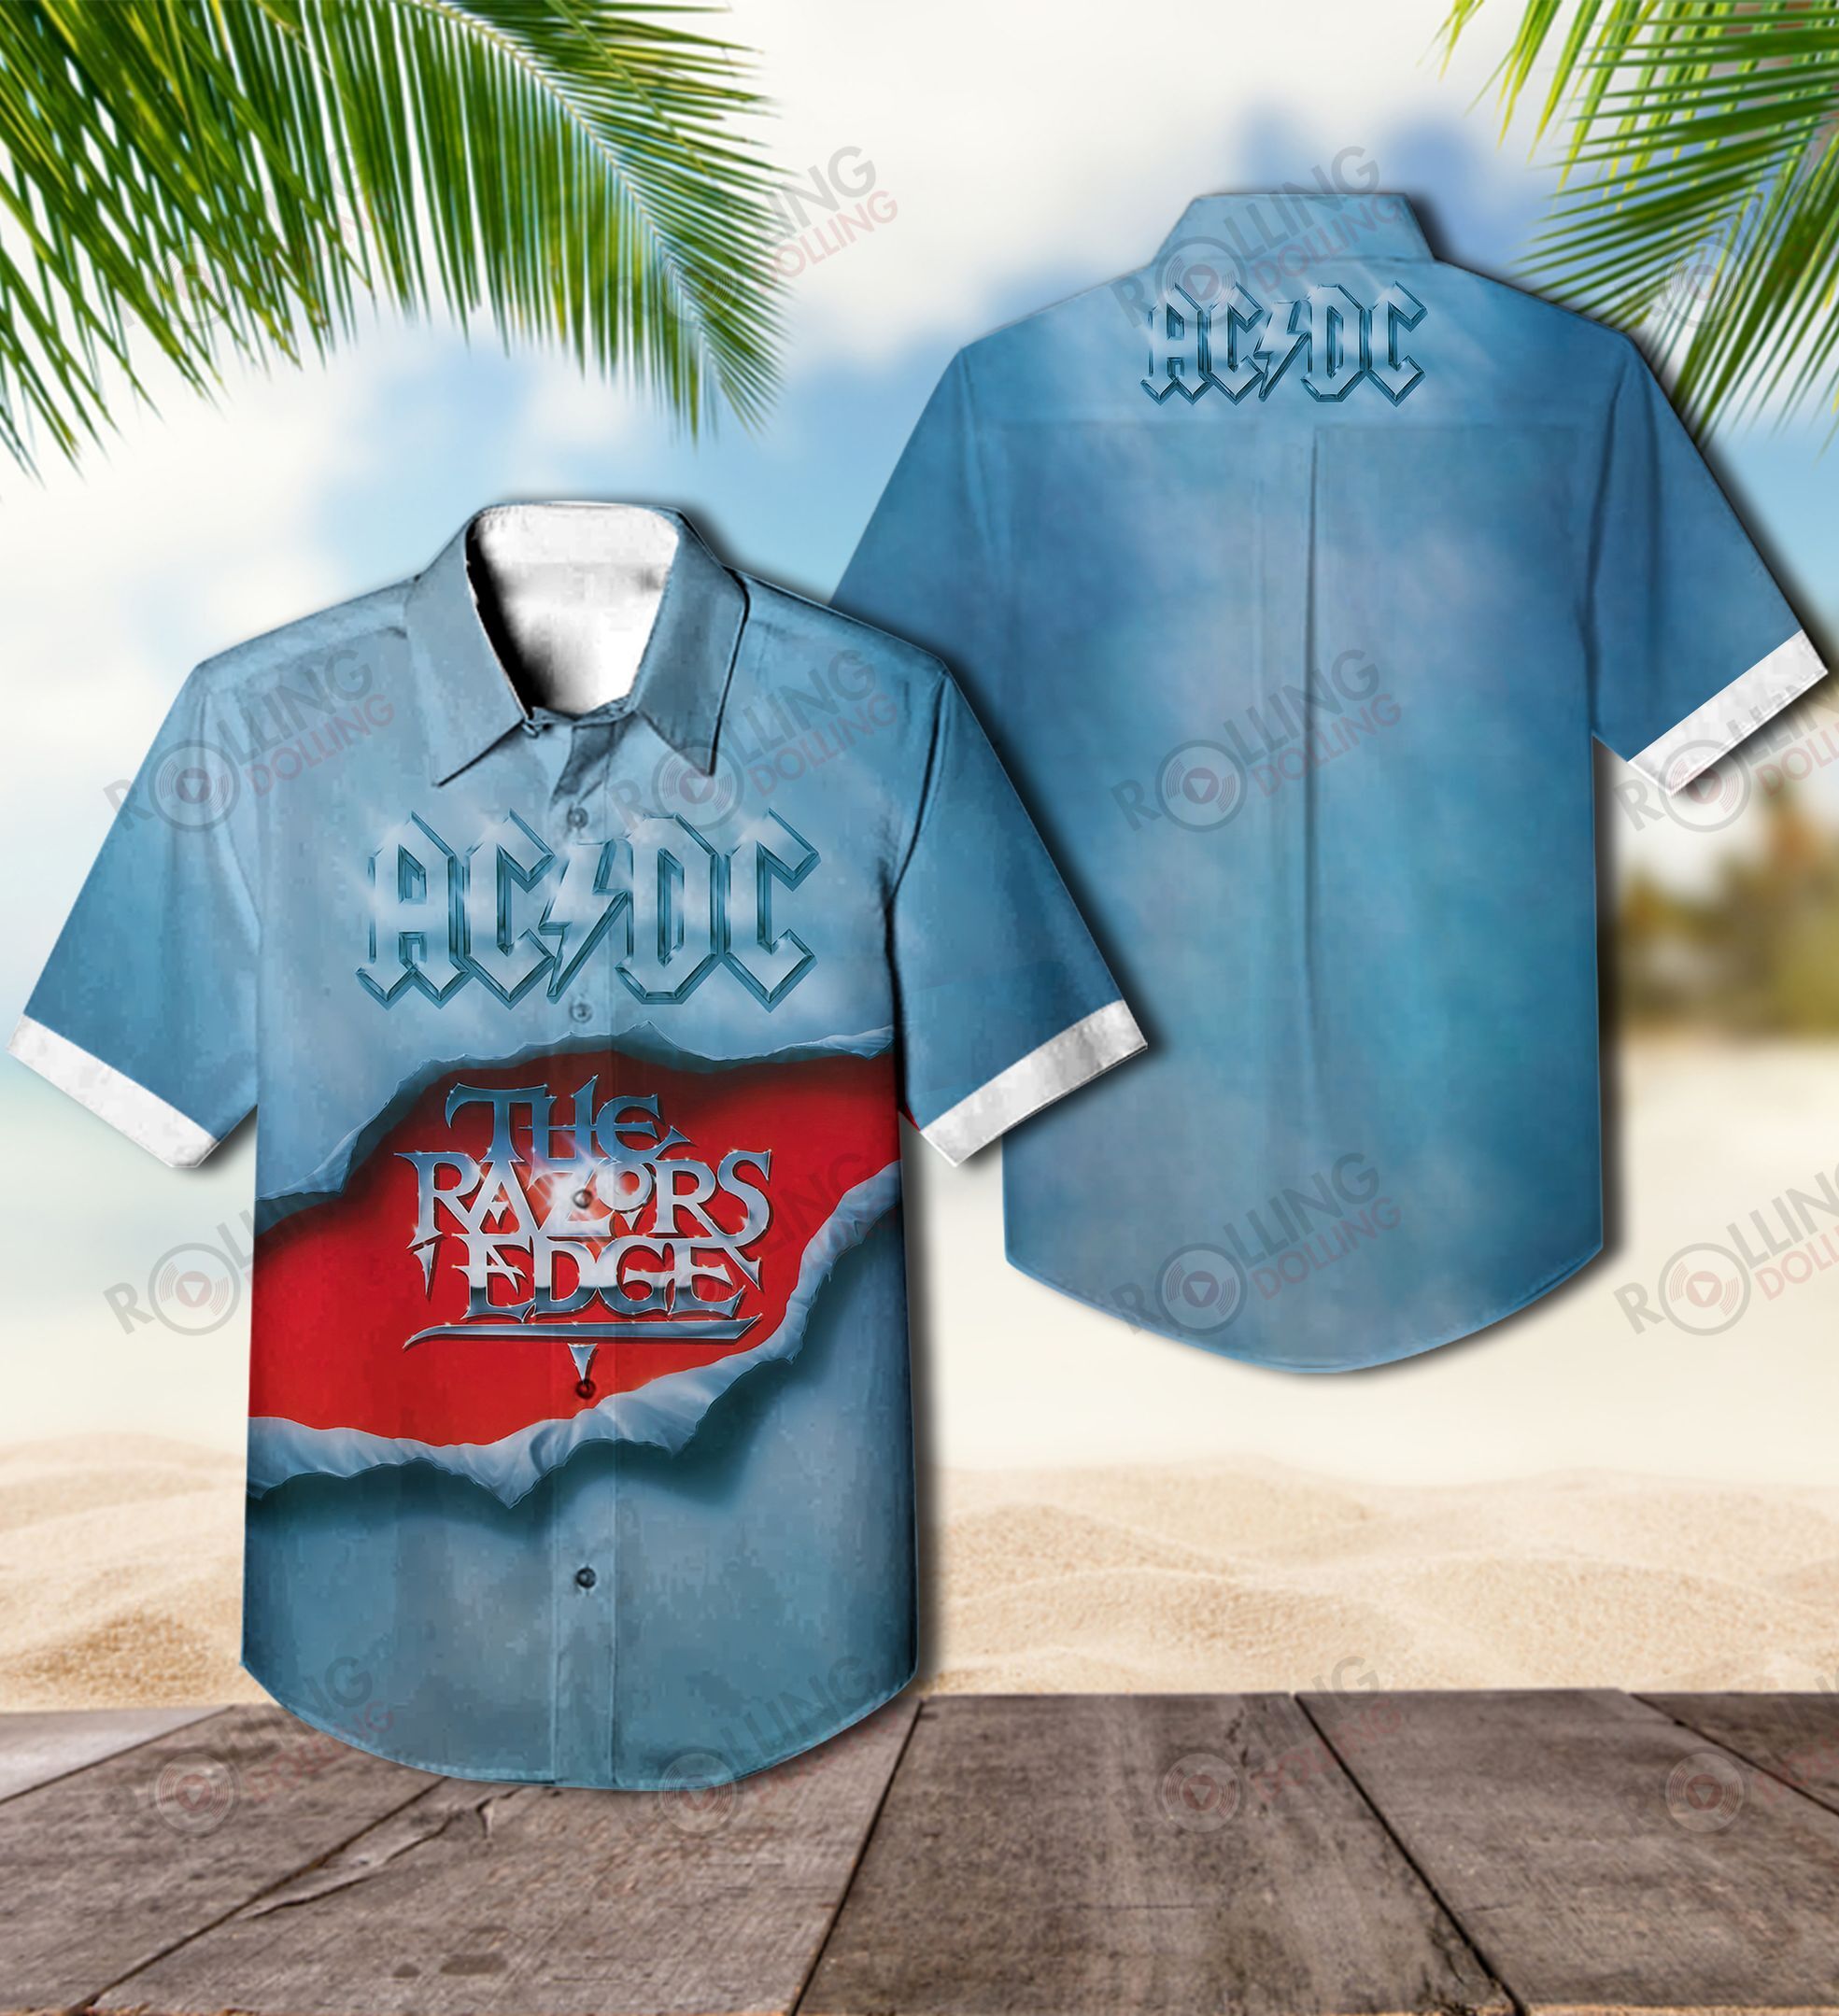 Now you can show off your love of all things band with this Hawaiian Shirt 51